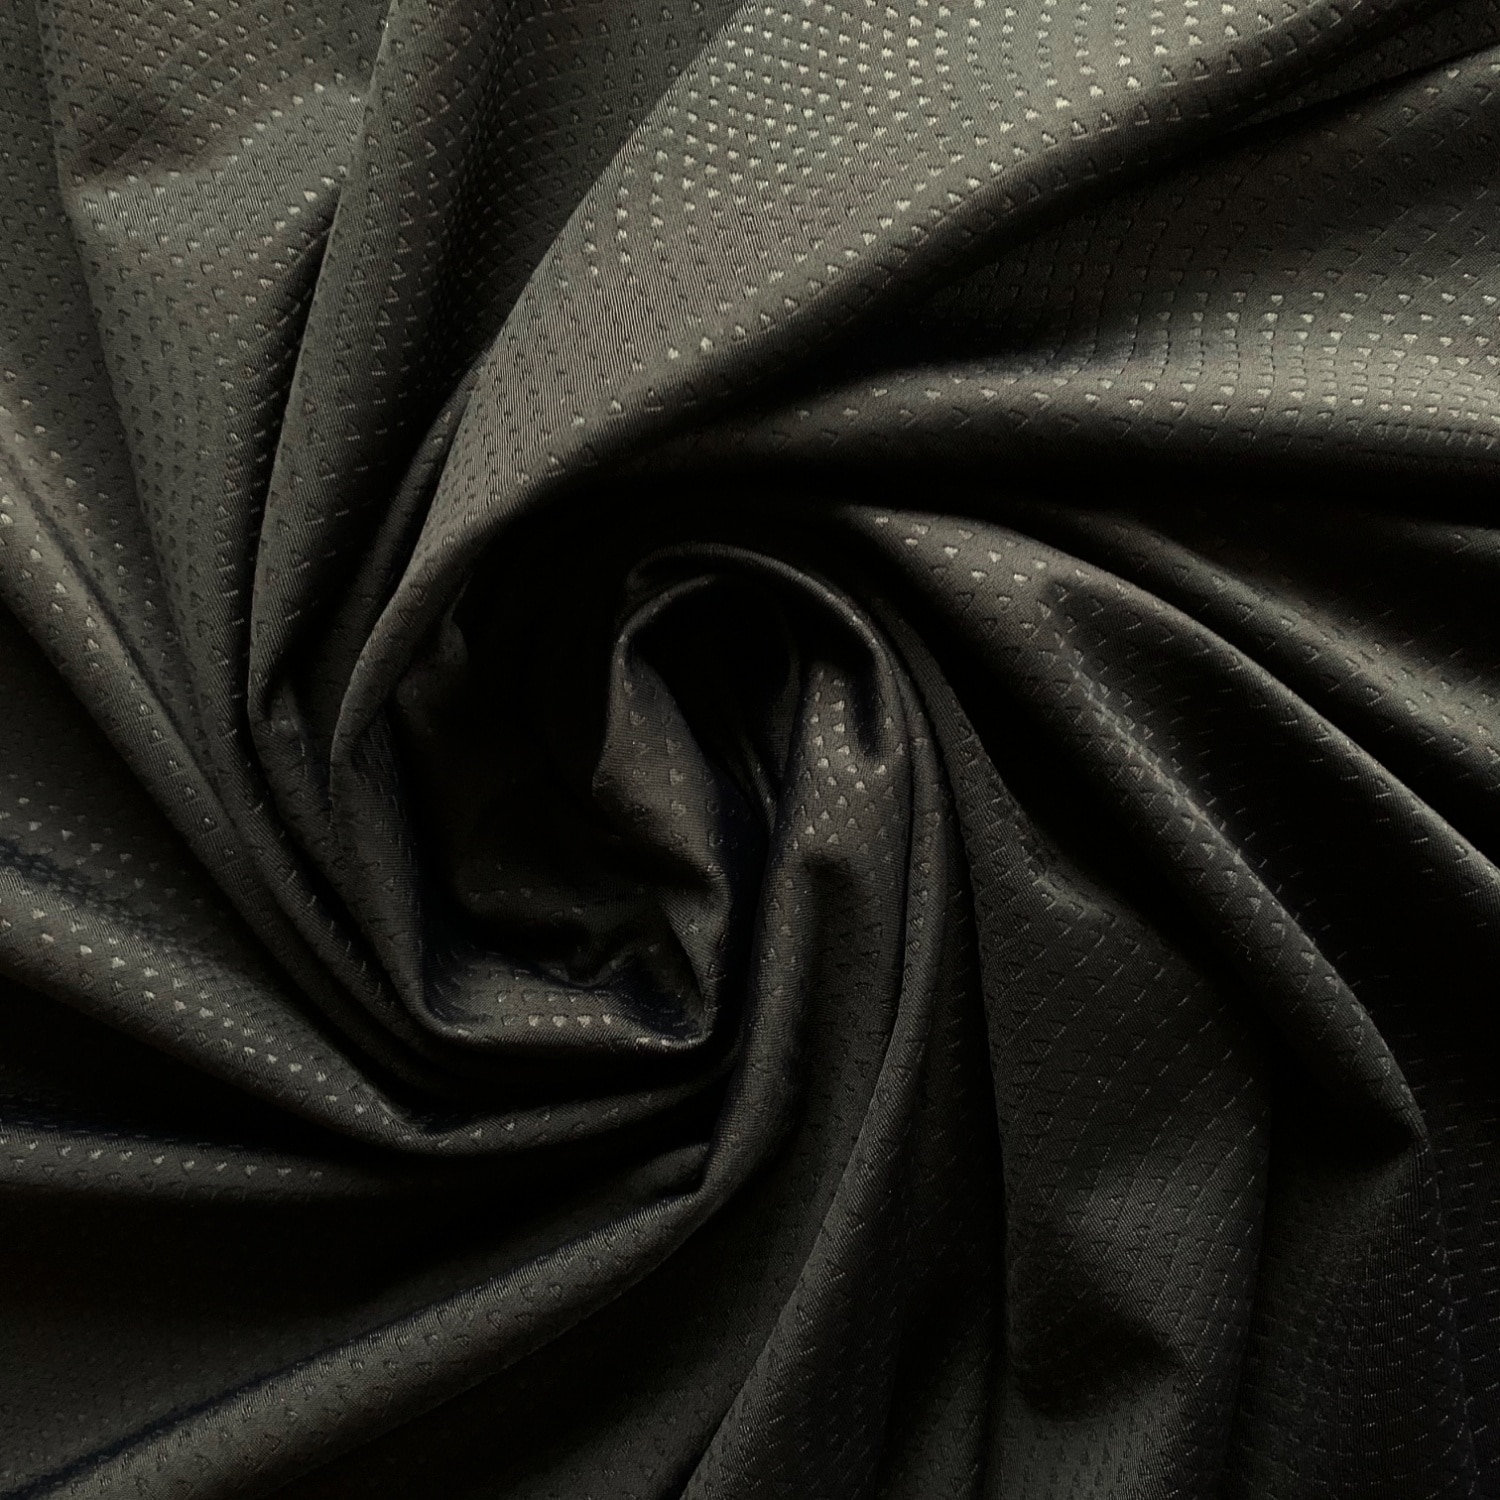 Black Fabric for Sale 